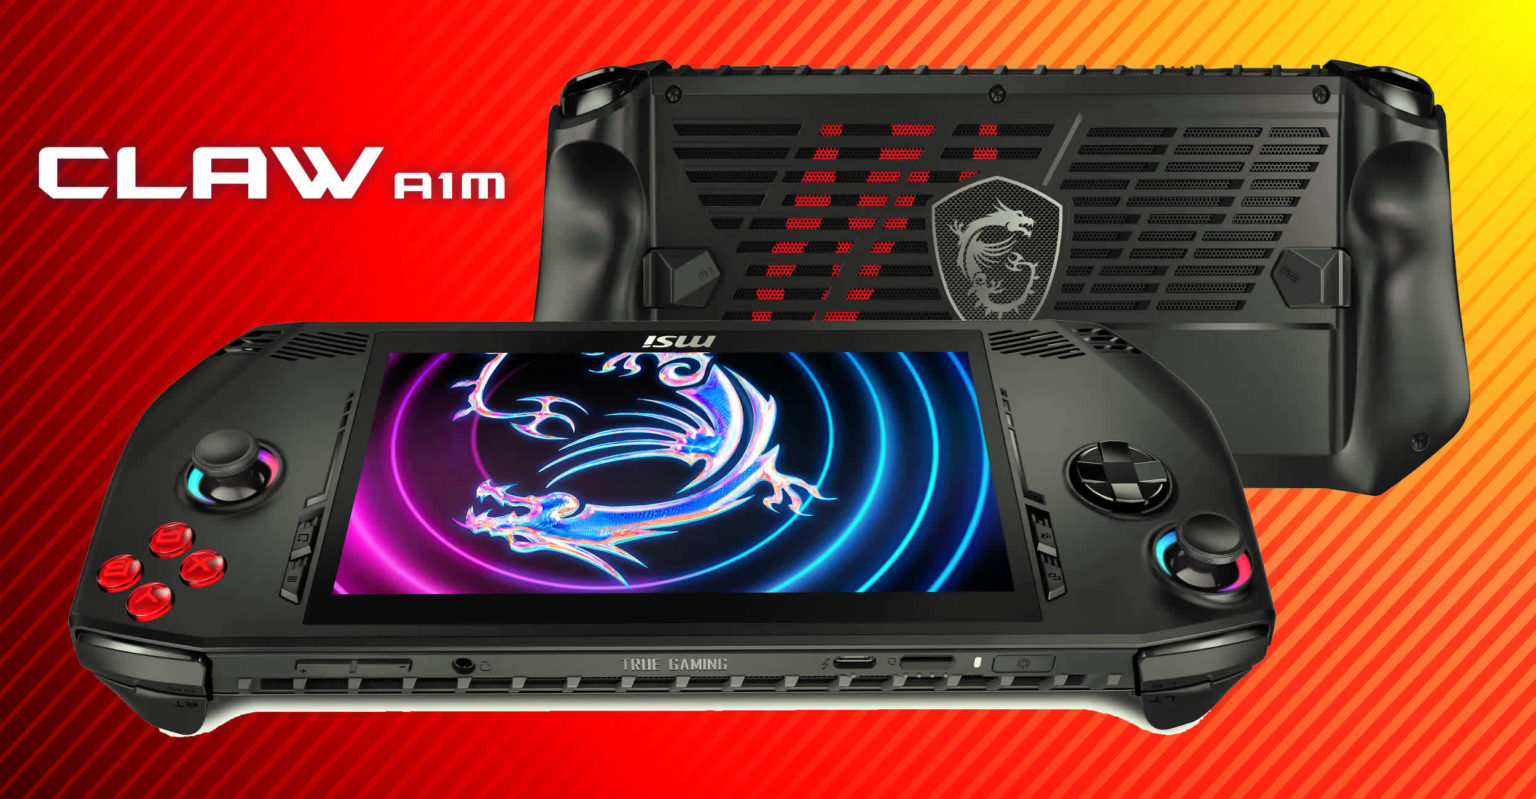 MSI unveils the Claw, an Intel-powered handheld gaming PC